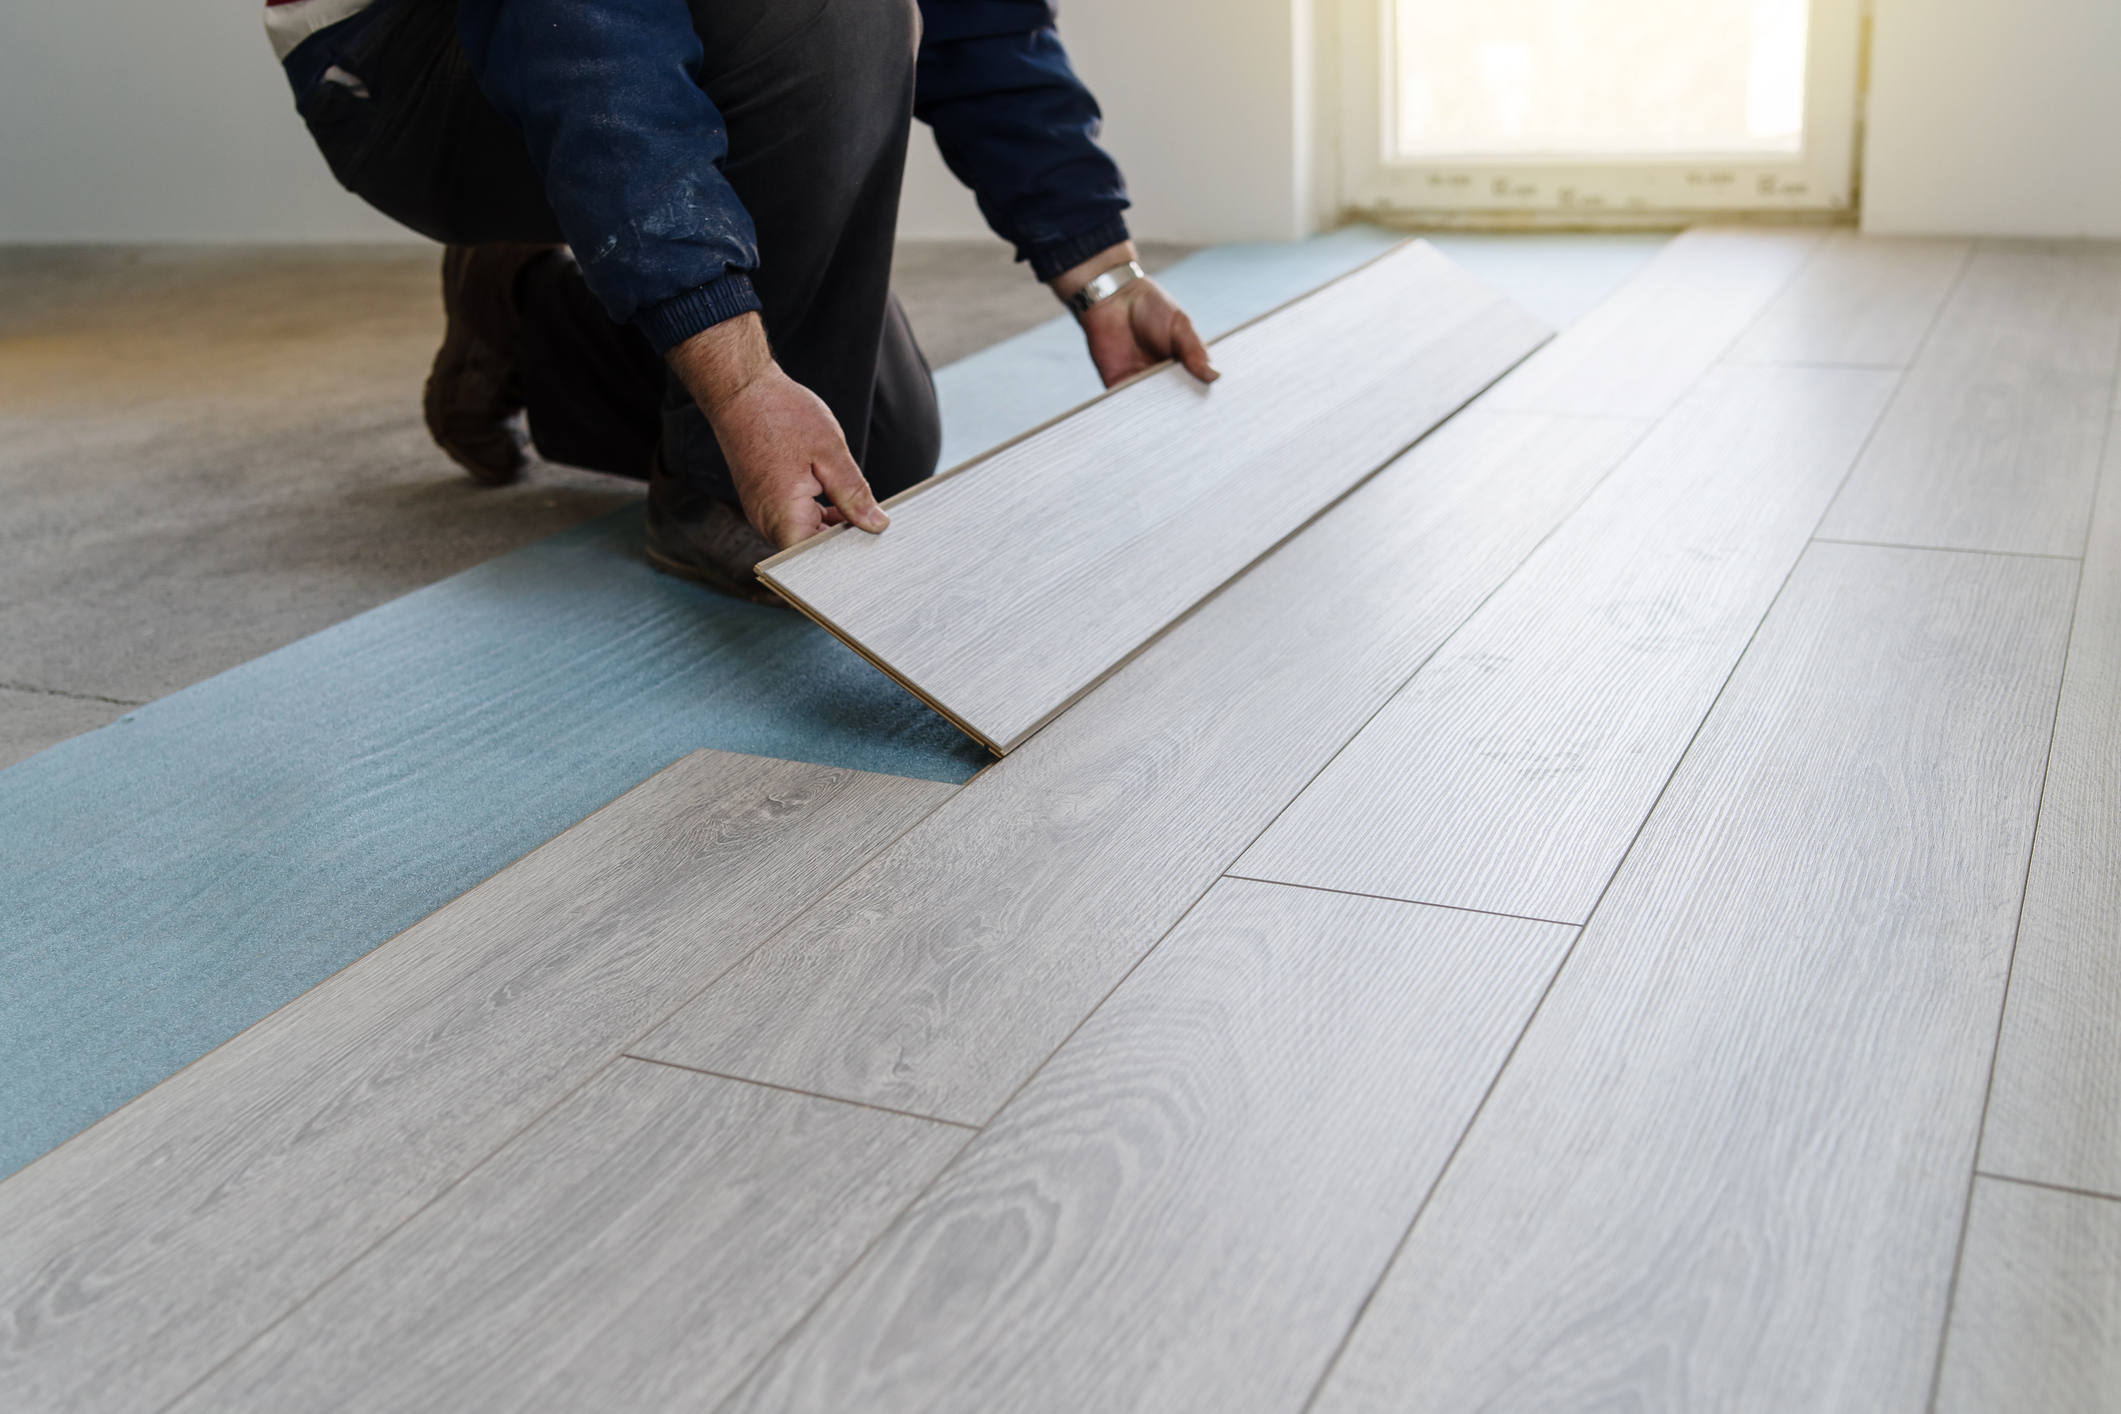 Temporary Flooring Ideas, How Much Does Laminate Flooring Cost To Install